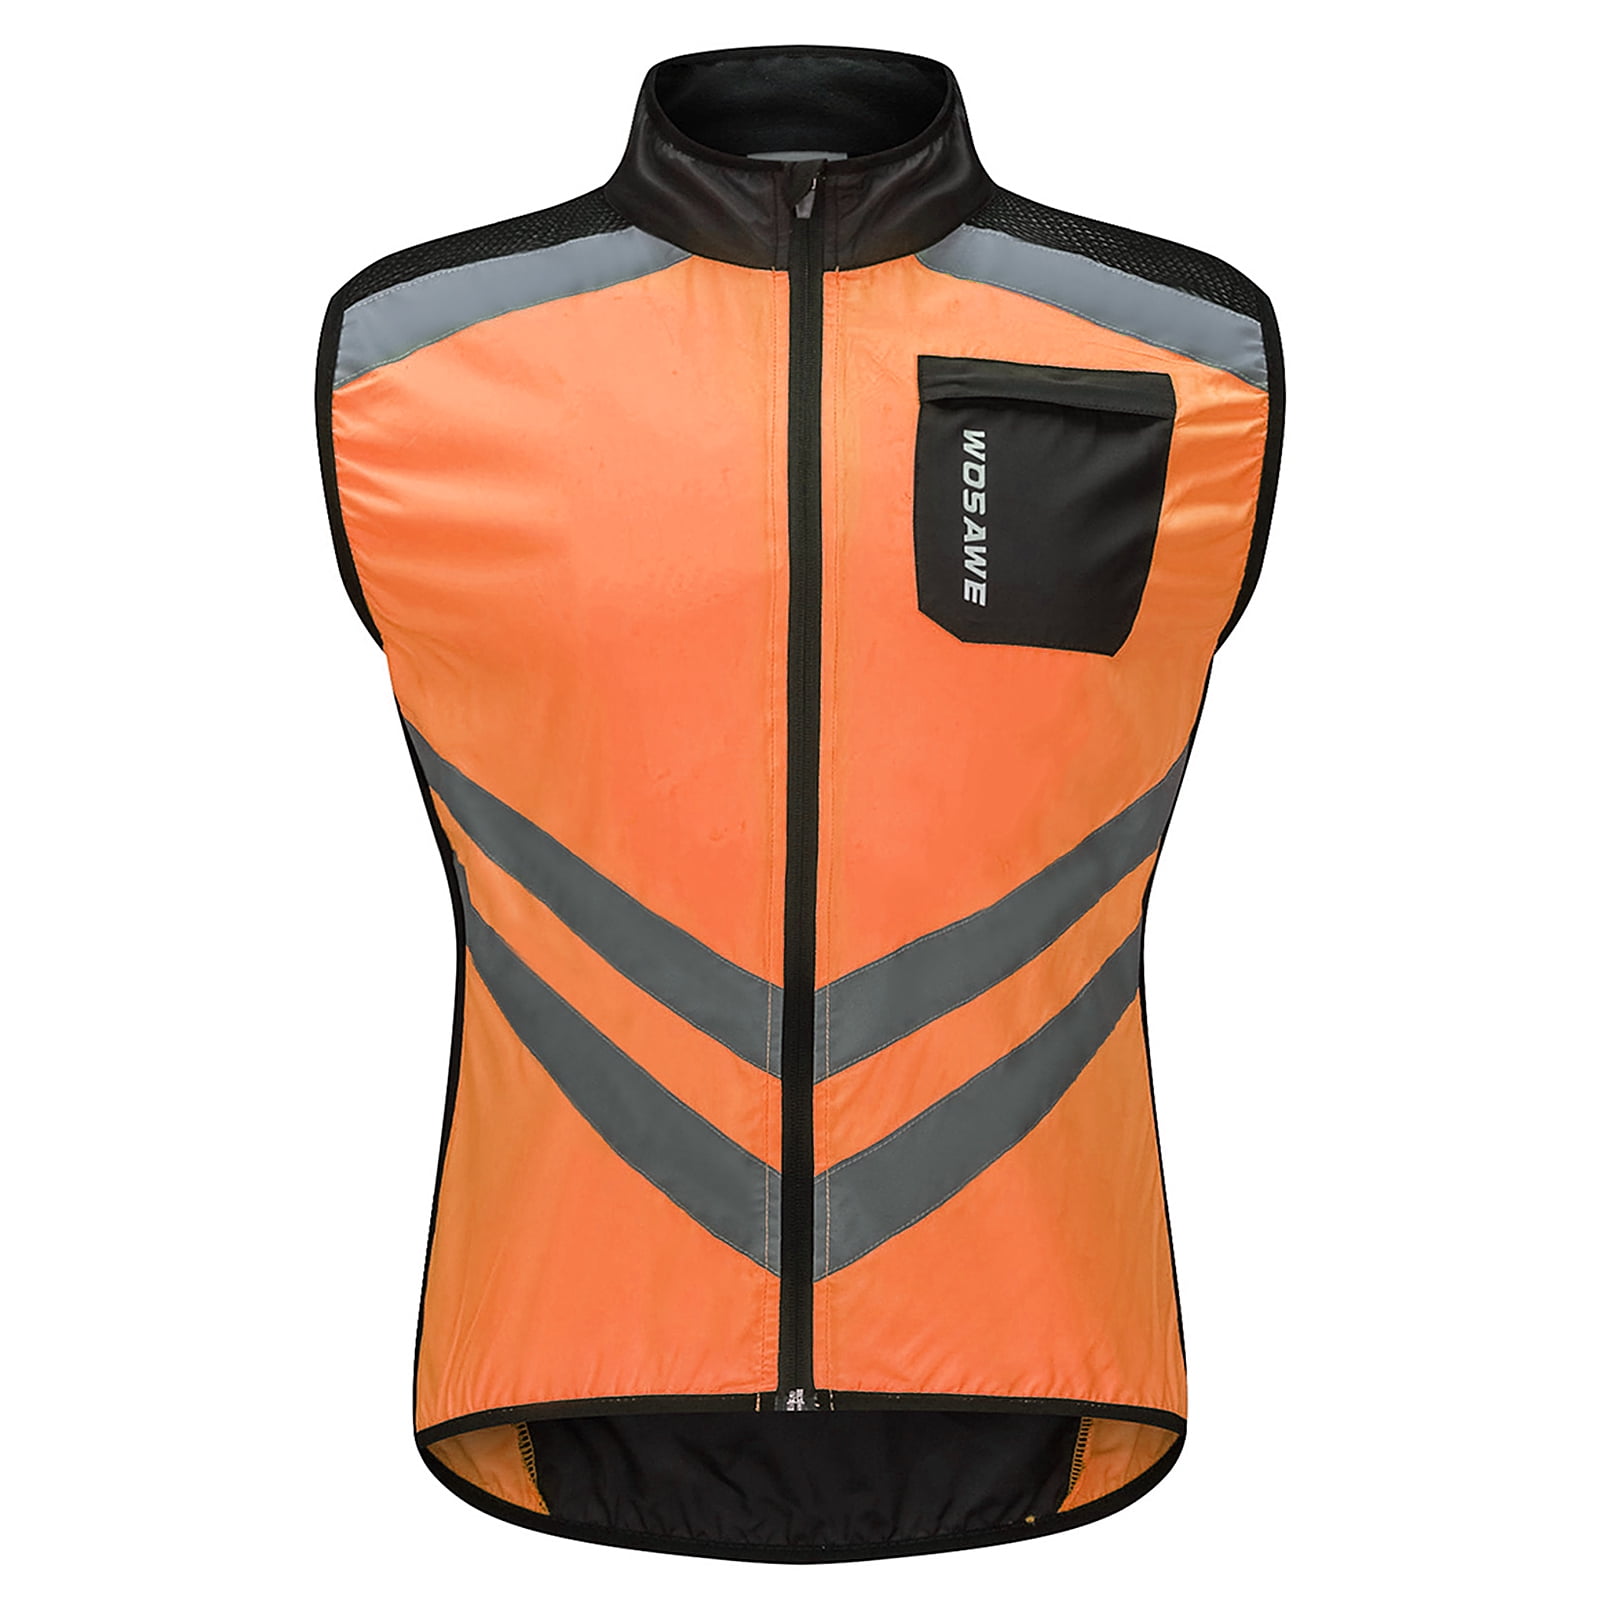 Details about   ARSUXEO Men's Ultrathin Lightweight Sleeveless Coat Jacket Running Cycling Y6V8 